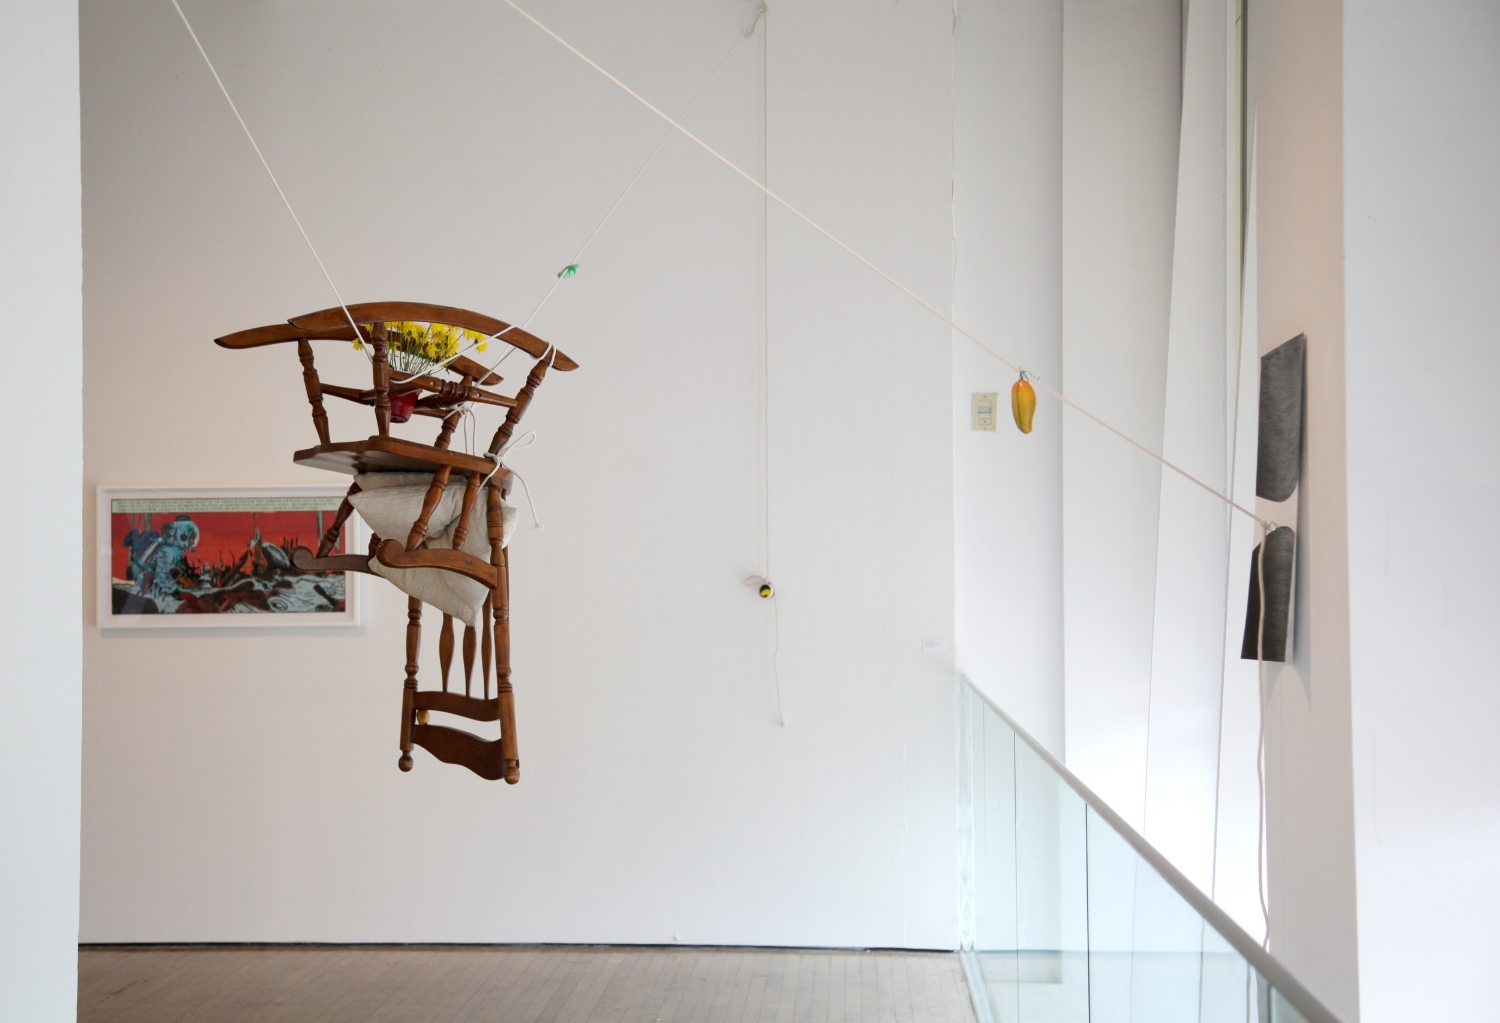  Ayesha Kamal Khan,&nbsp; This May Fall (chairlift) &nbsp;(2015)&nbsp;and Chitra Ganesh,&nbsp; Her Nuclear Waters  (2013), exhibition view, photograph by Sadia Shirazi. 